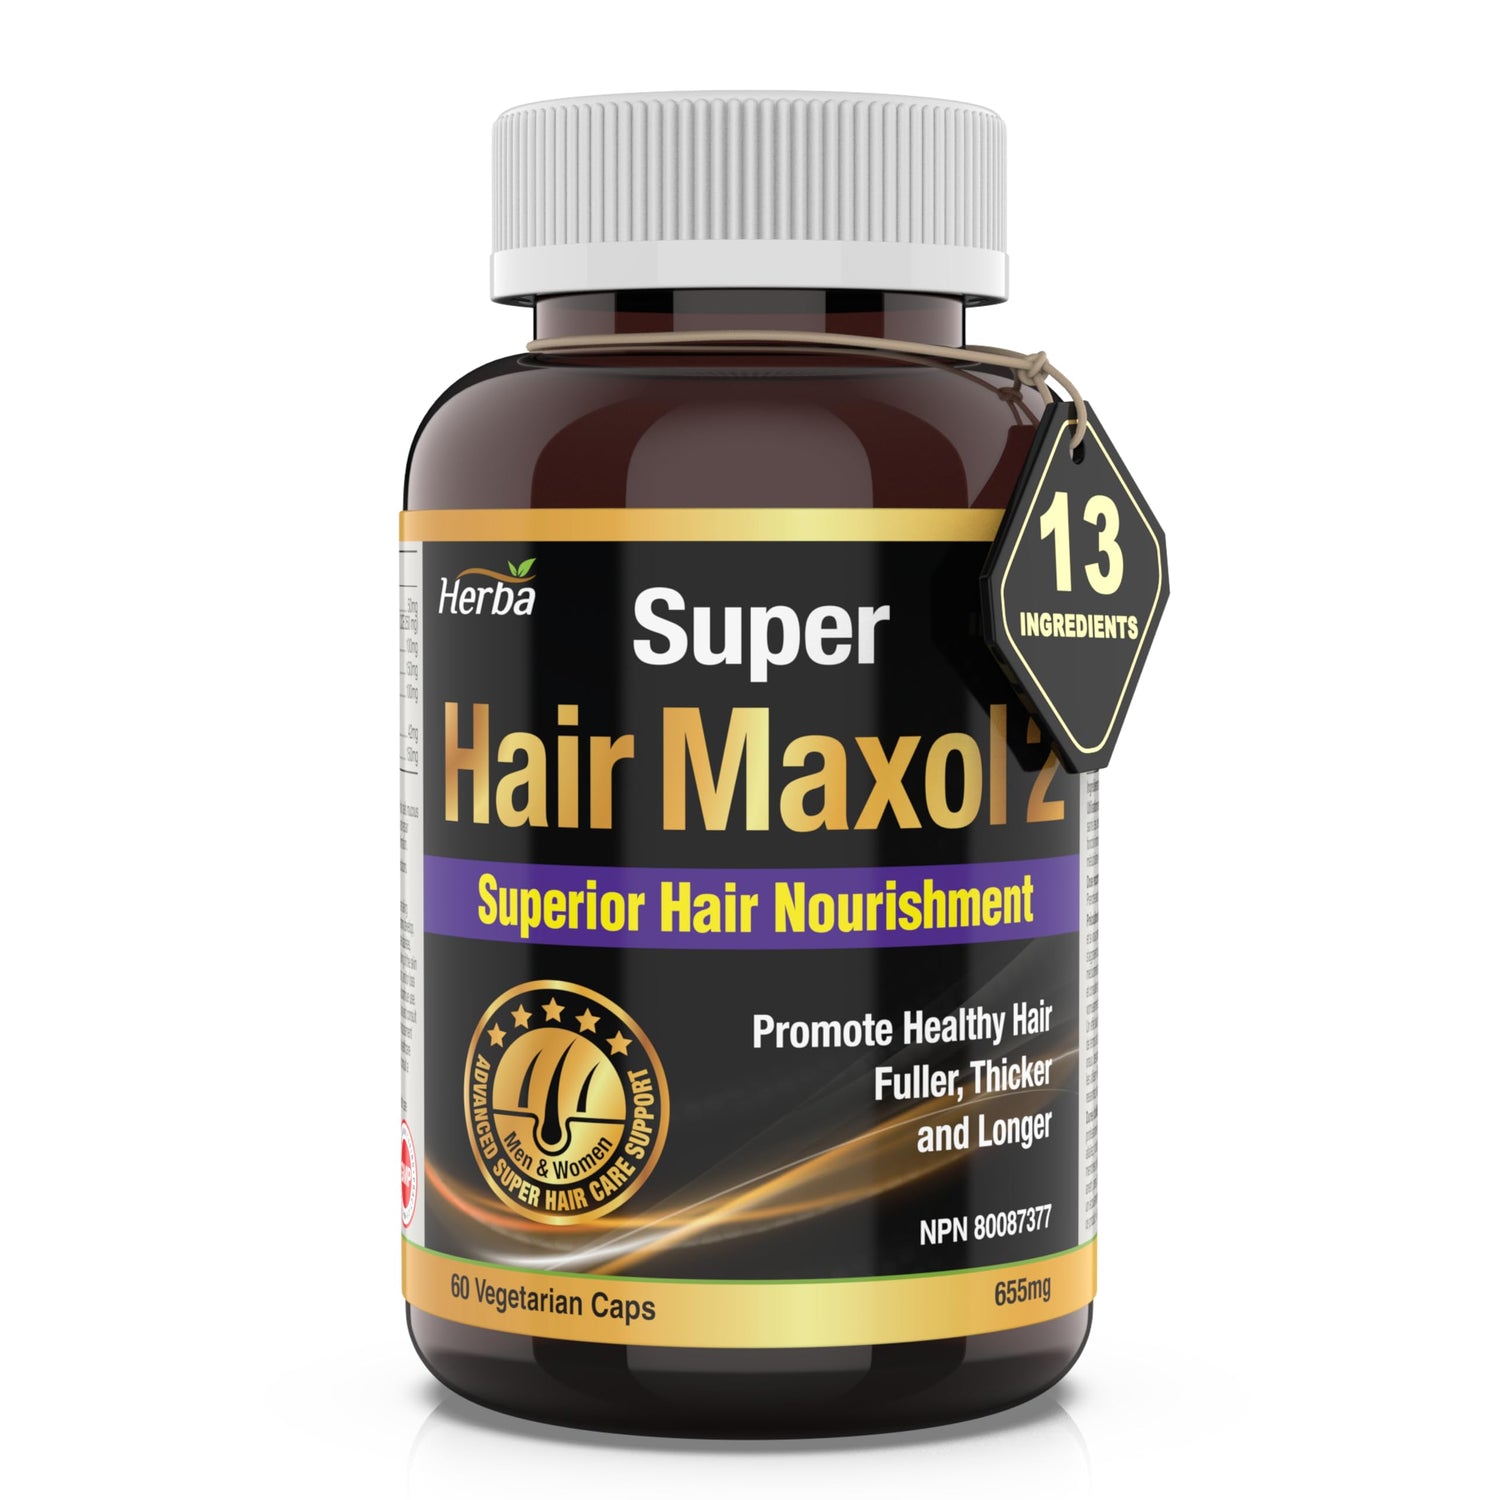 buy hair supplement made in Canada